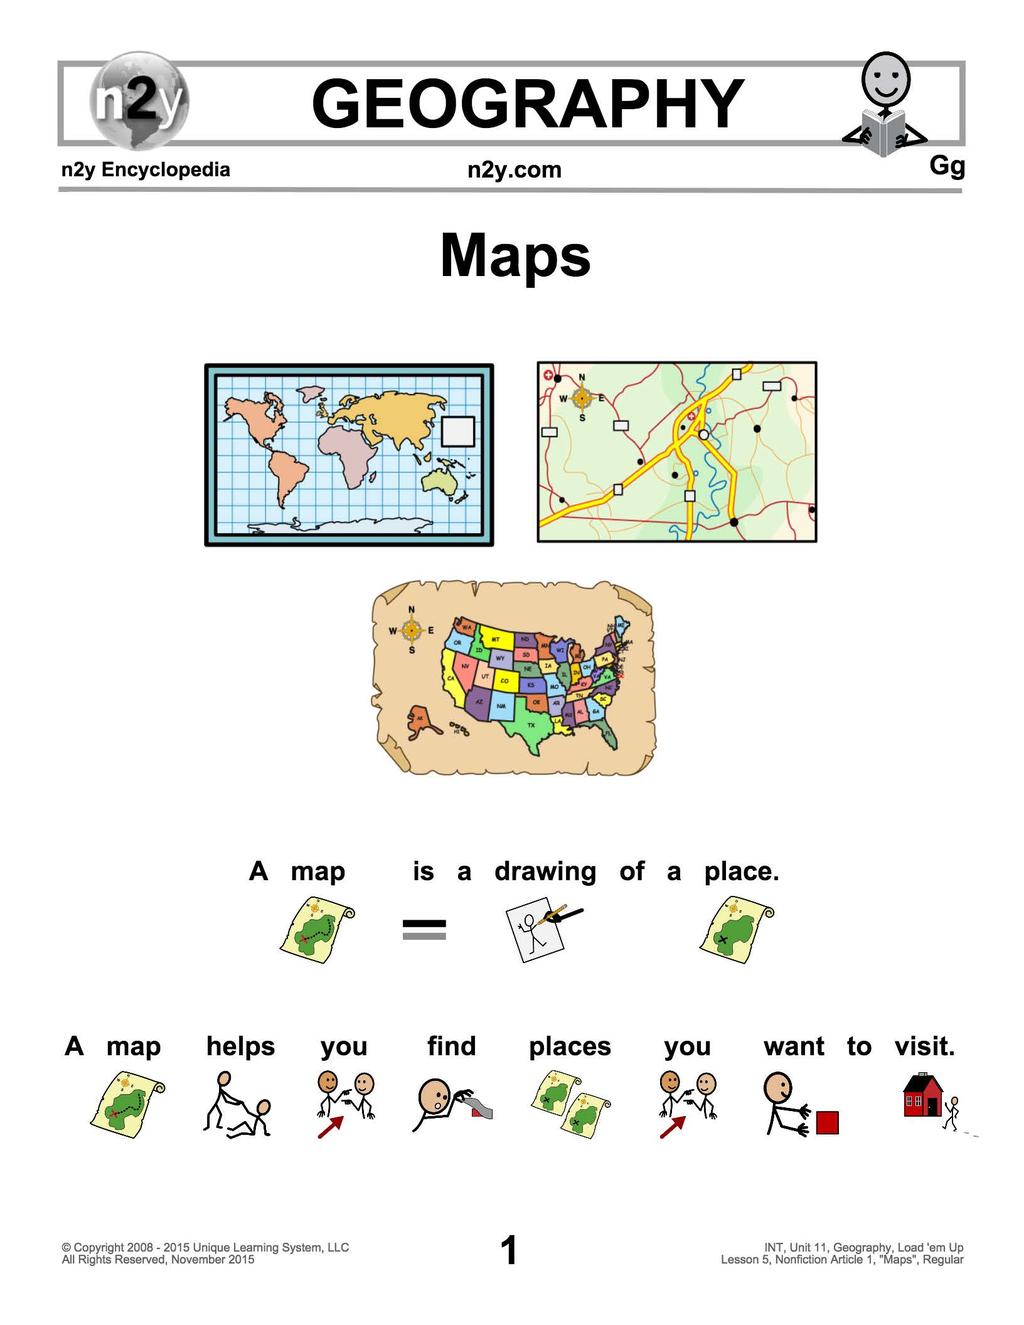 n2y Encyclopedia GEOGRAPHY n2y.com Maps Gg A map is a drawing!ii - - of a place.!ii A map helps you find places!